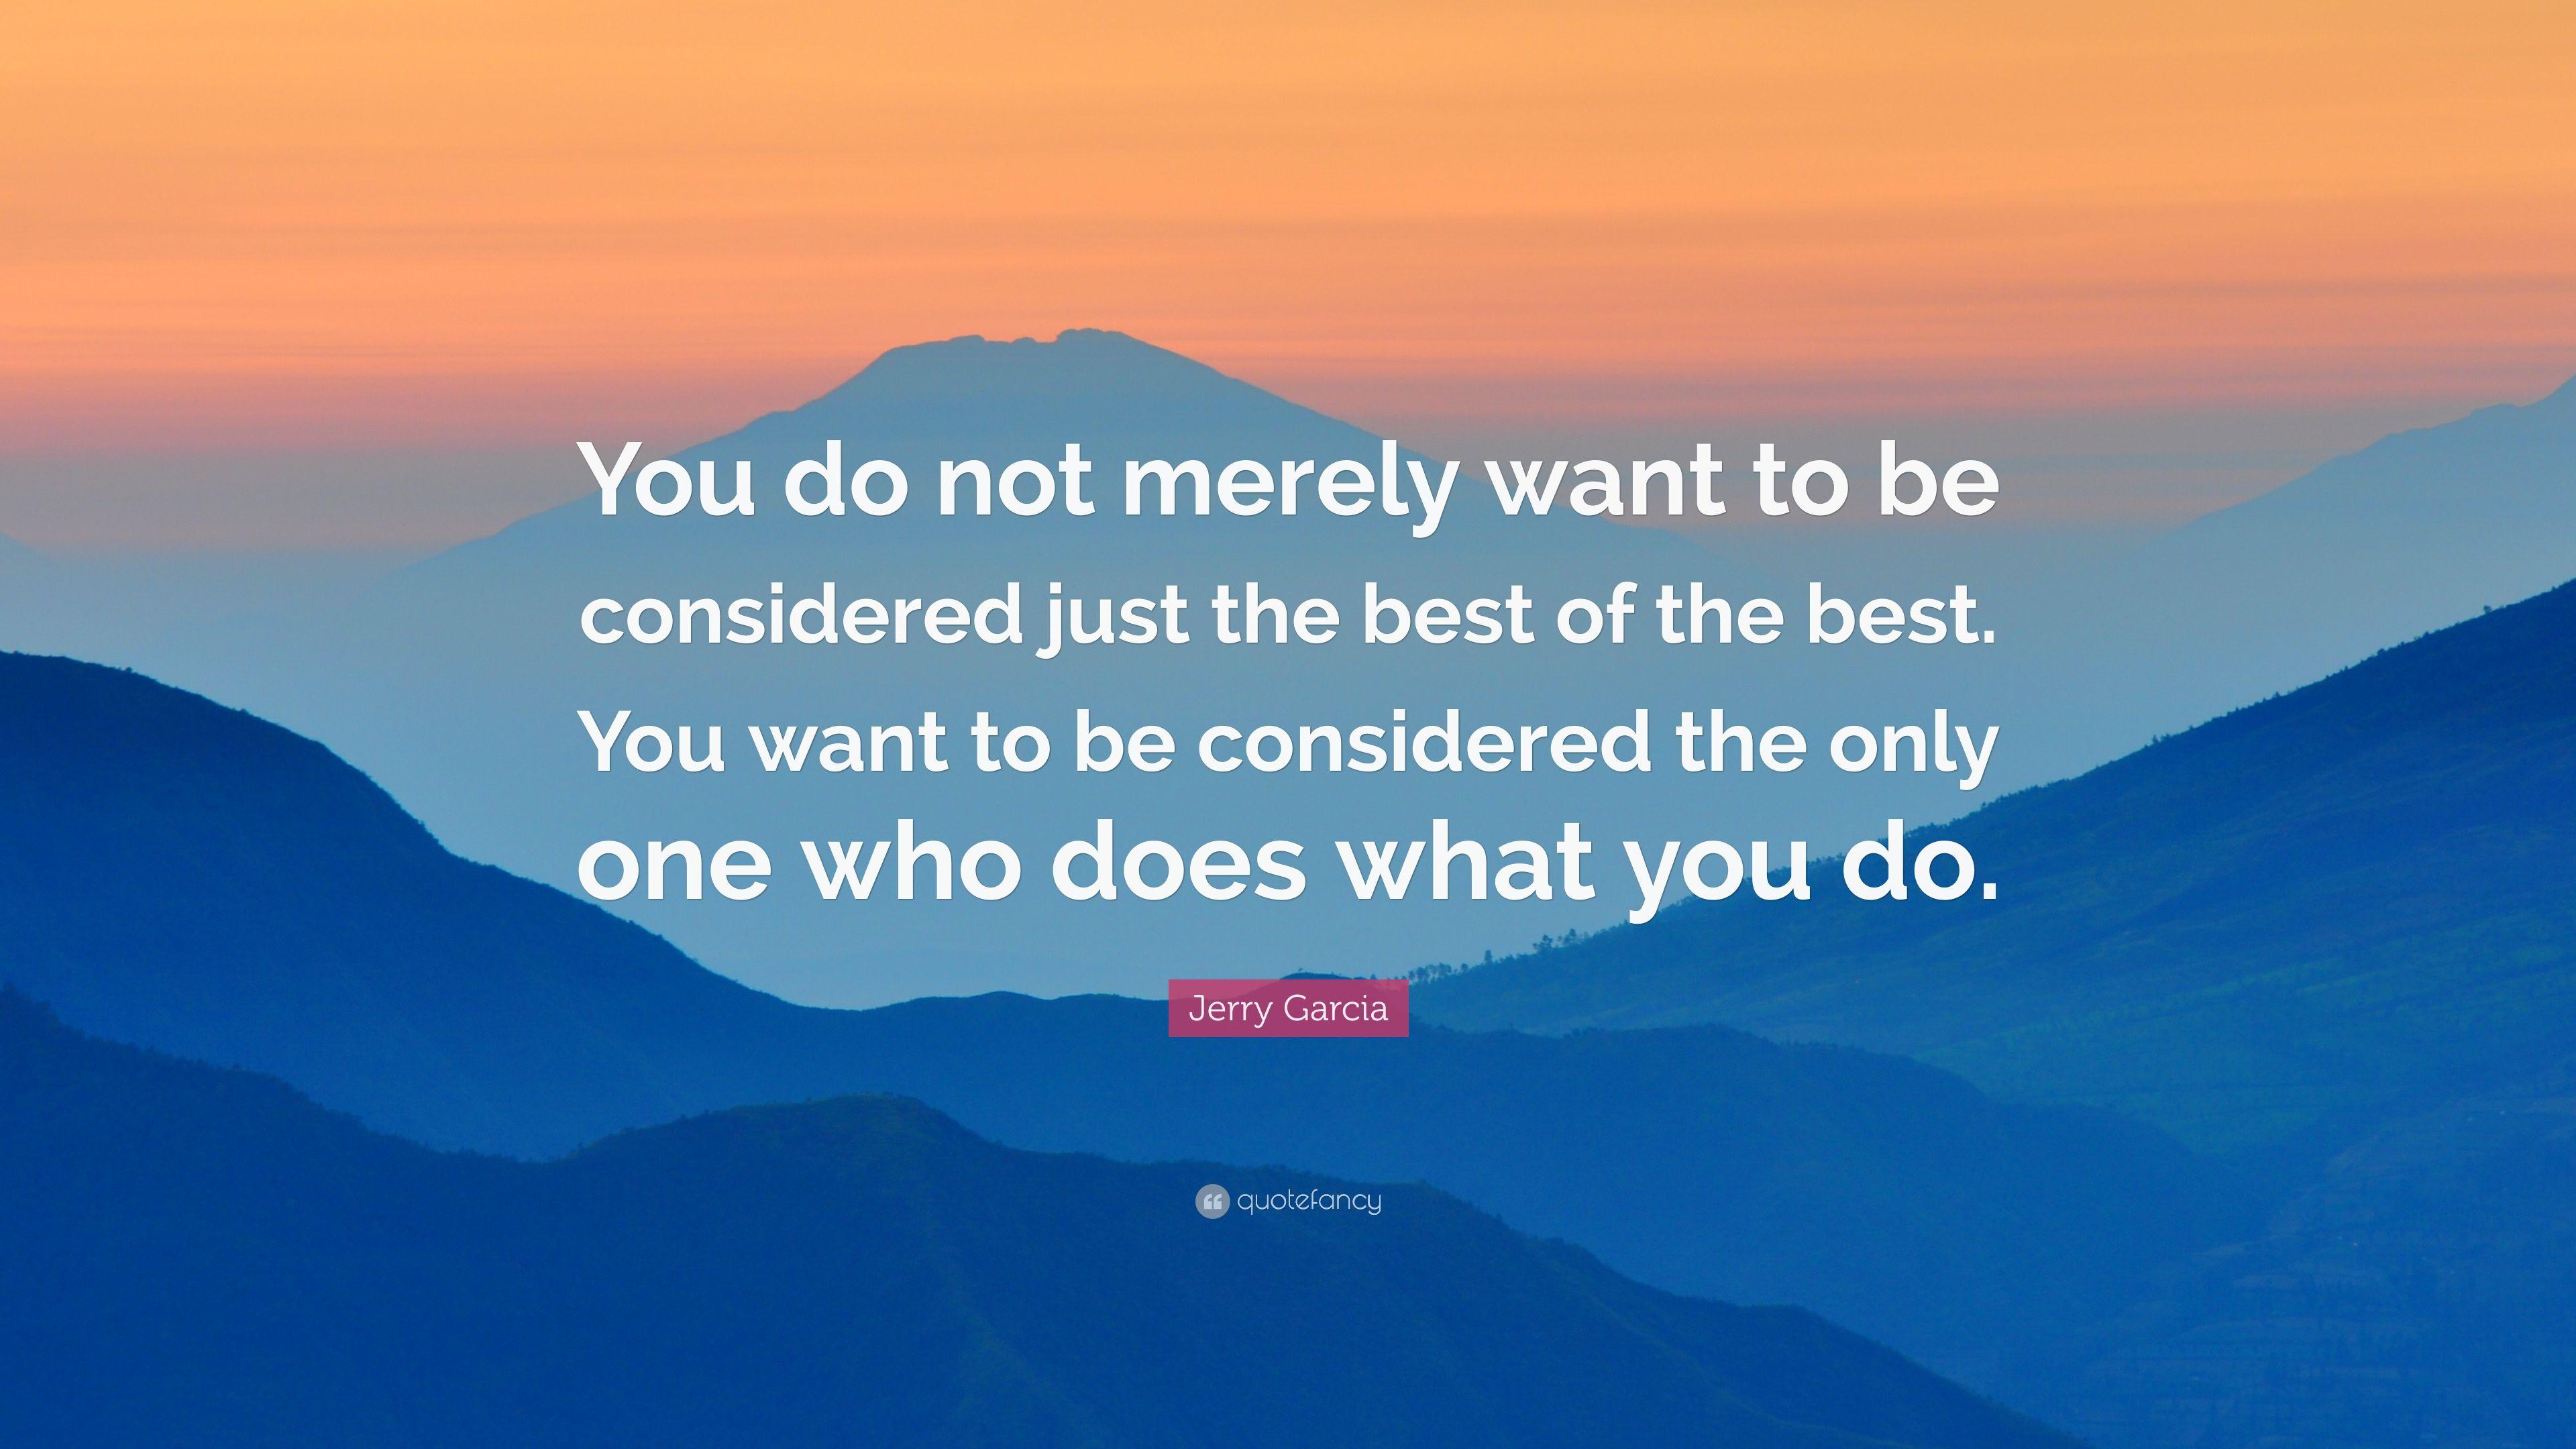 Jerry Garcia Quote: “You do not merely want to be considered just